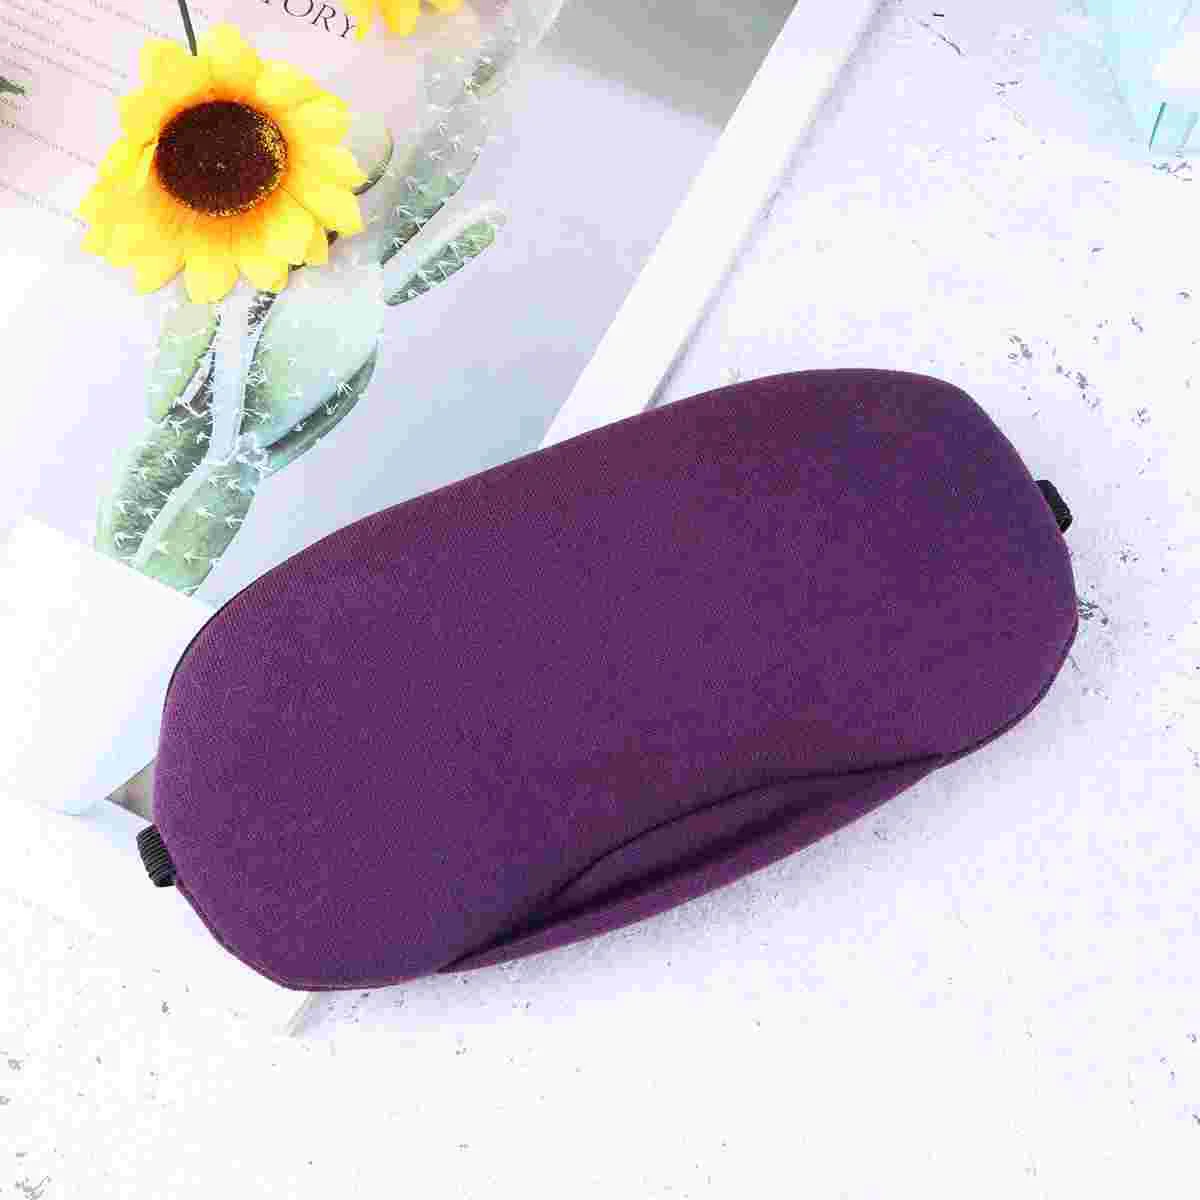 

USB Steam Eye Mask Blindfold Hot Compress Eye Shield for Relieving Insomnia Dry Eye Fatigue (Purple, Fragrance Free)